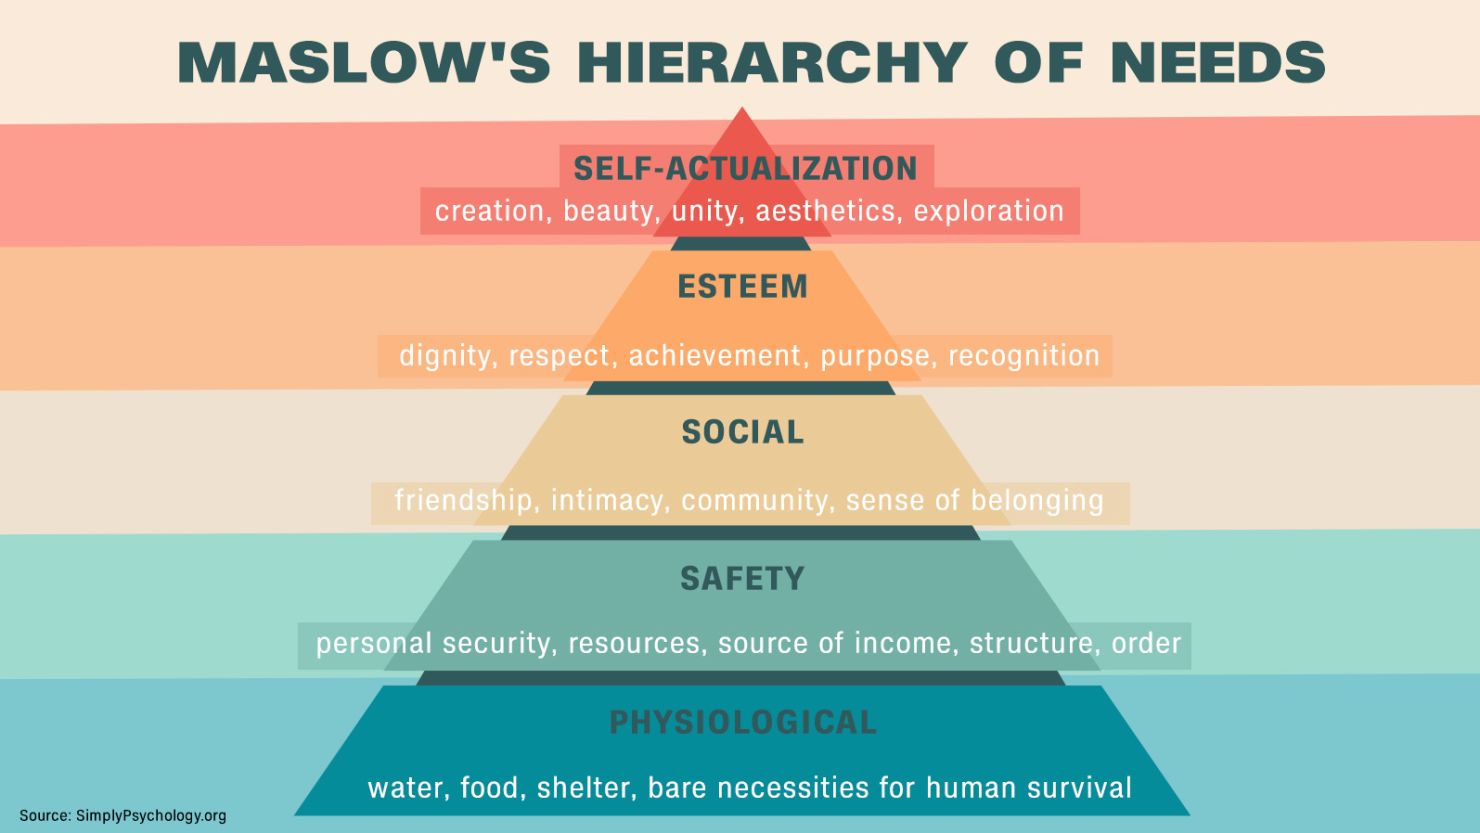 Maslow's hierarchy of needs is typically represented as a pyramid.